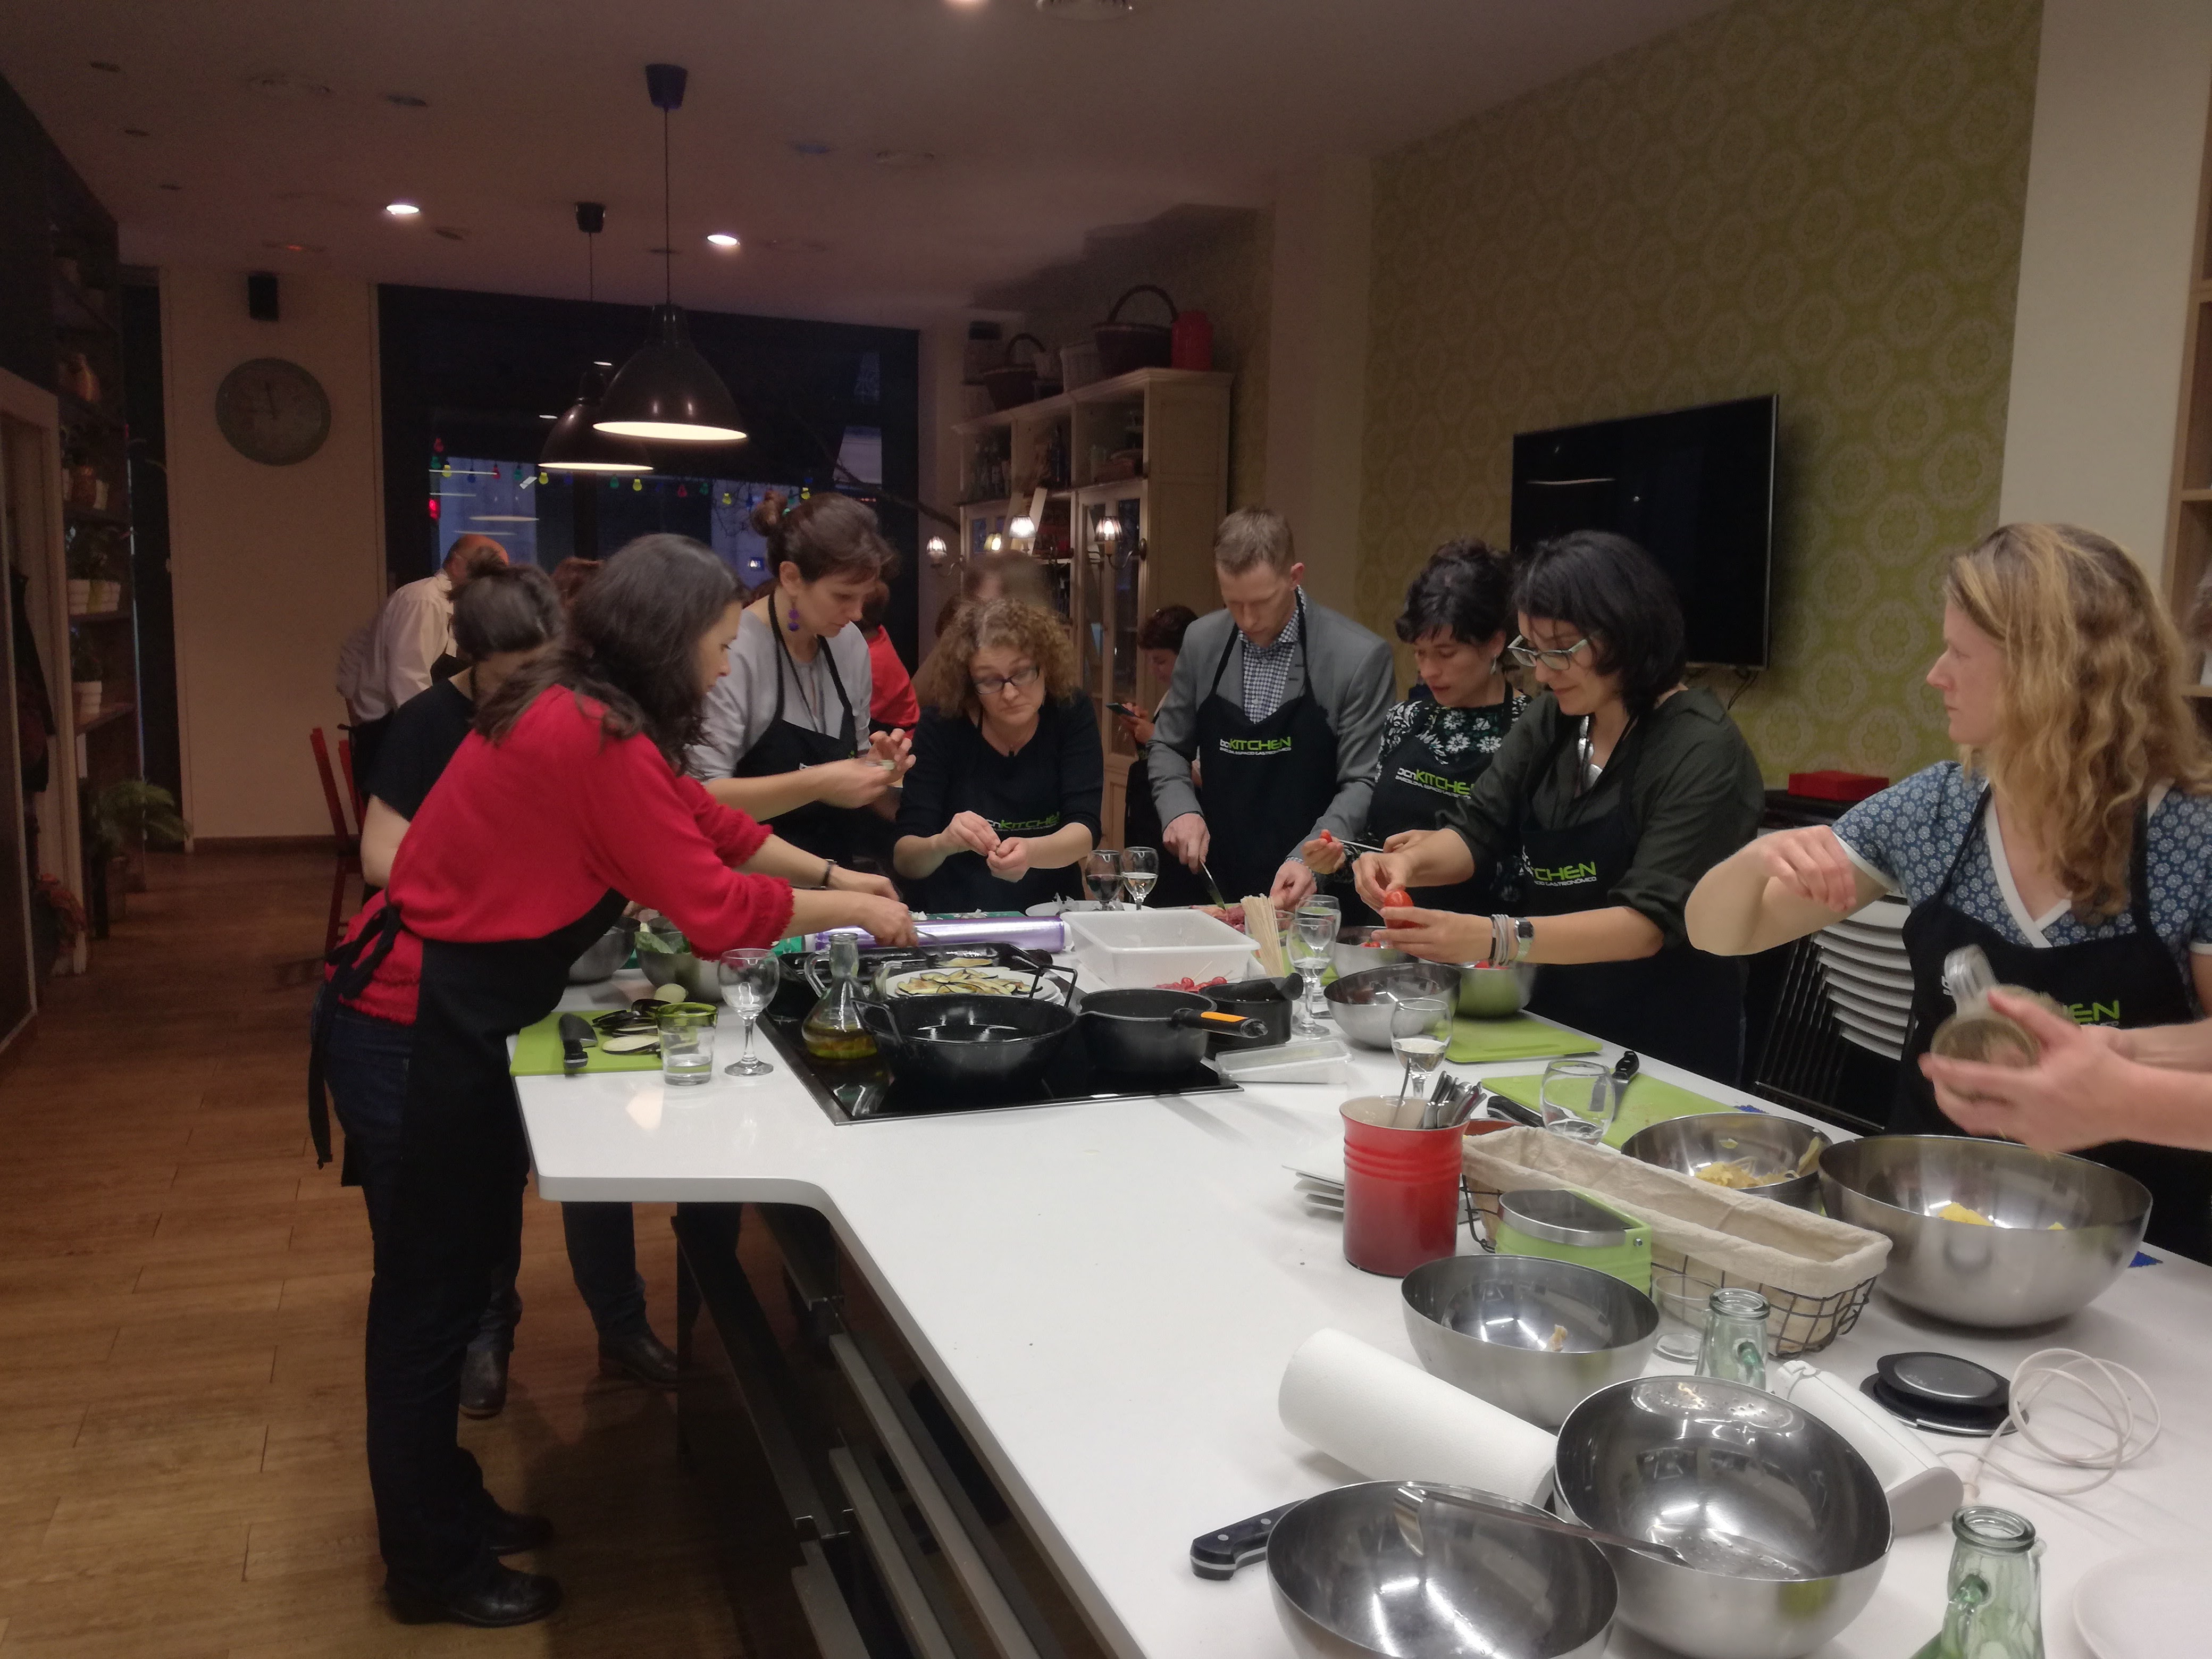 Members of the ORION project team pco-creating tapas at bcnKitchen